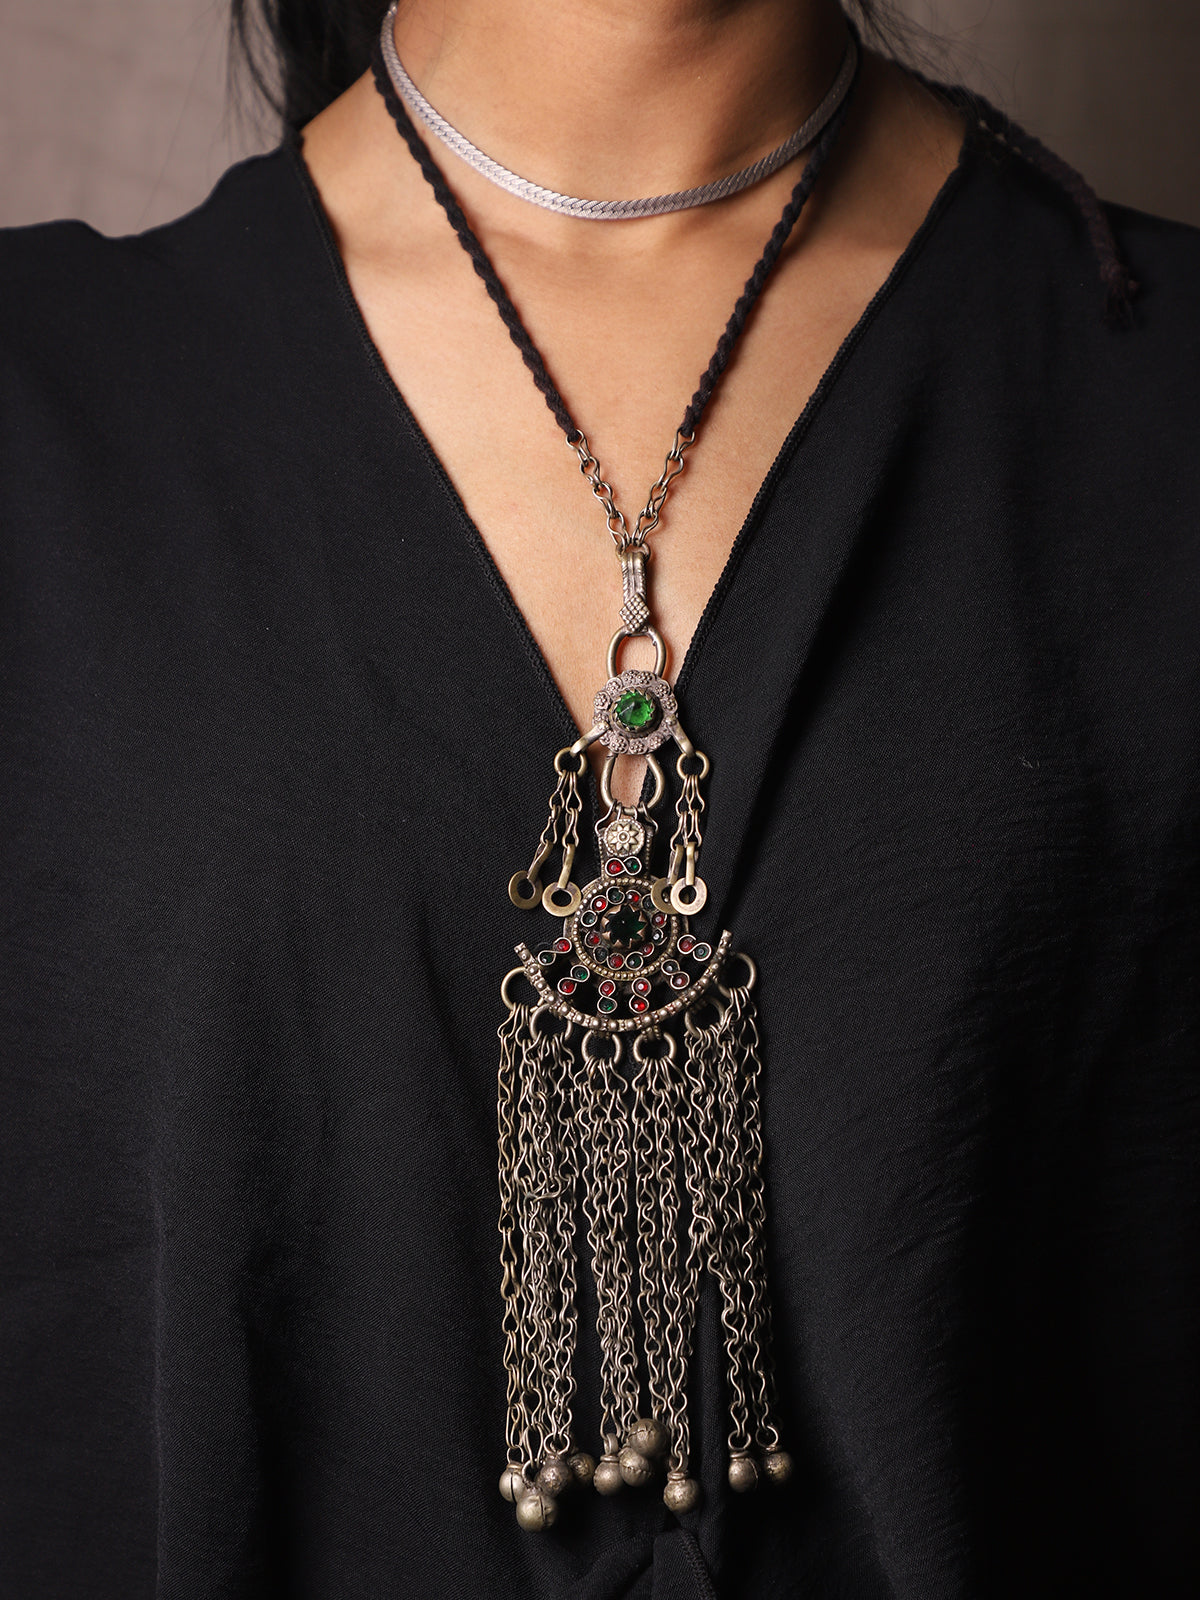 Ghungroo Necklace - Black